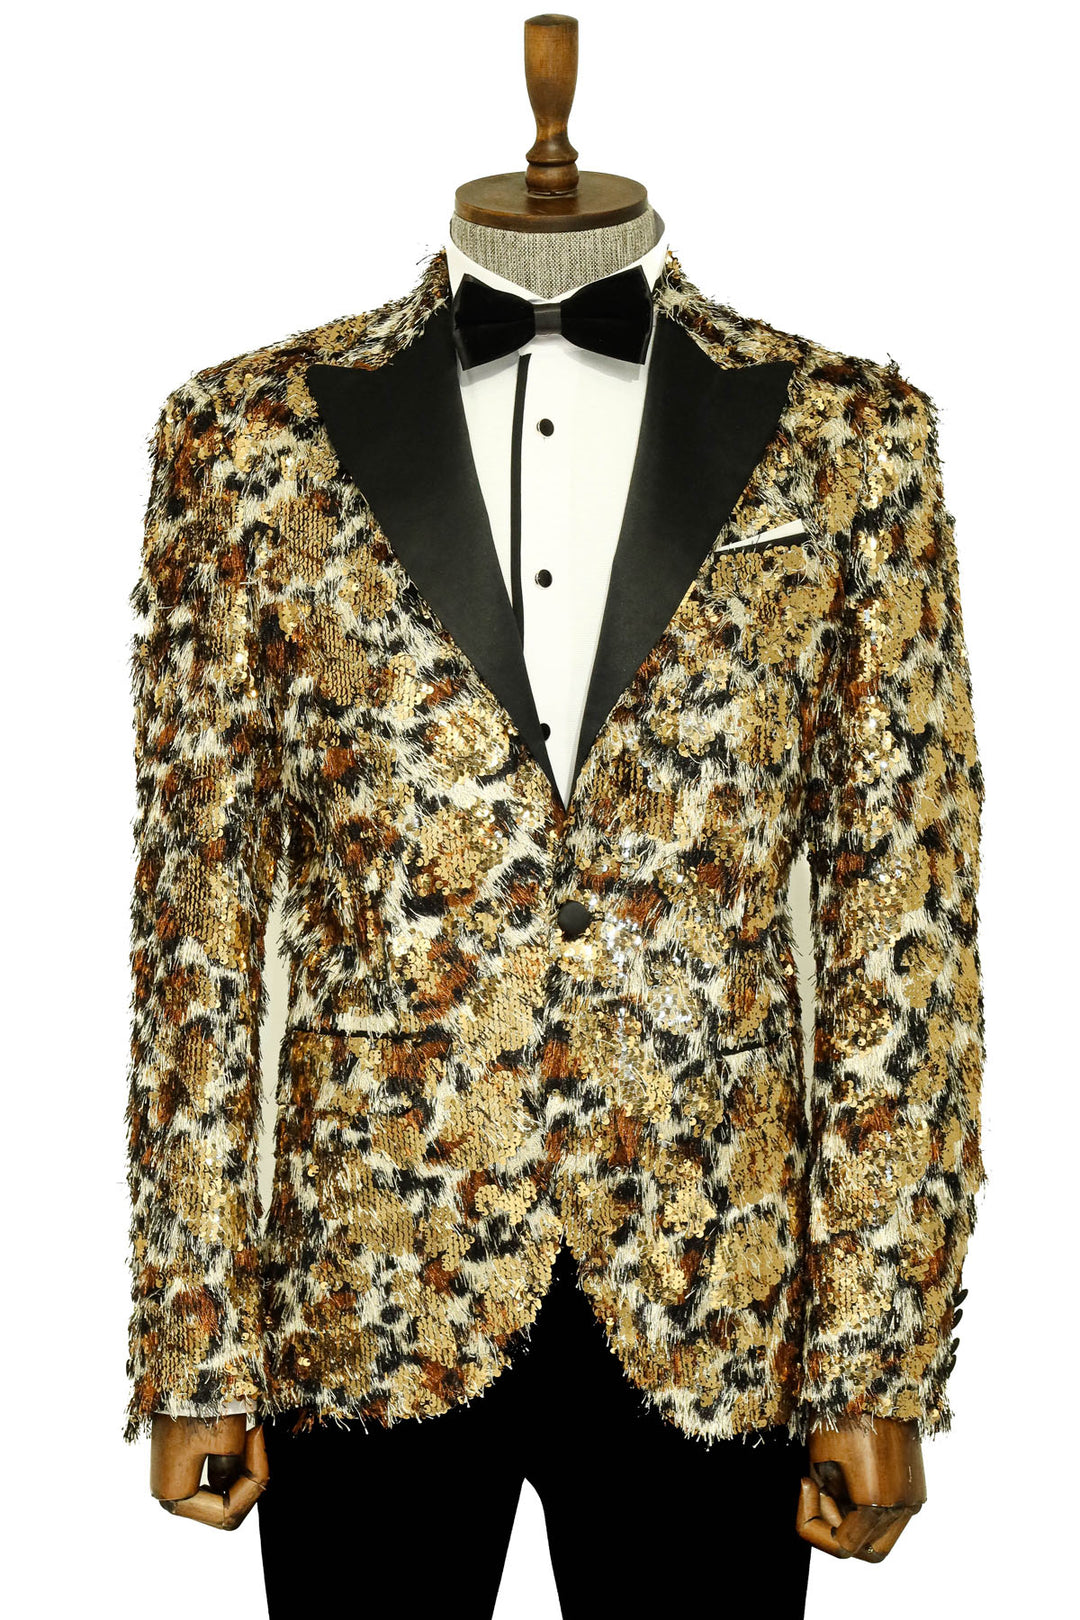 White and Gold Feather Patterned Men's Prom Jacket - Wessi